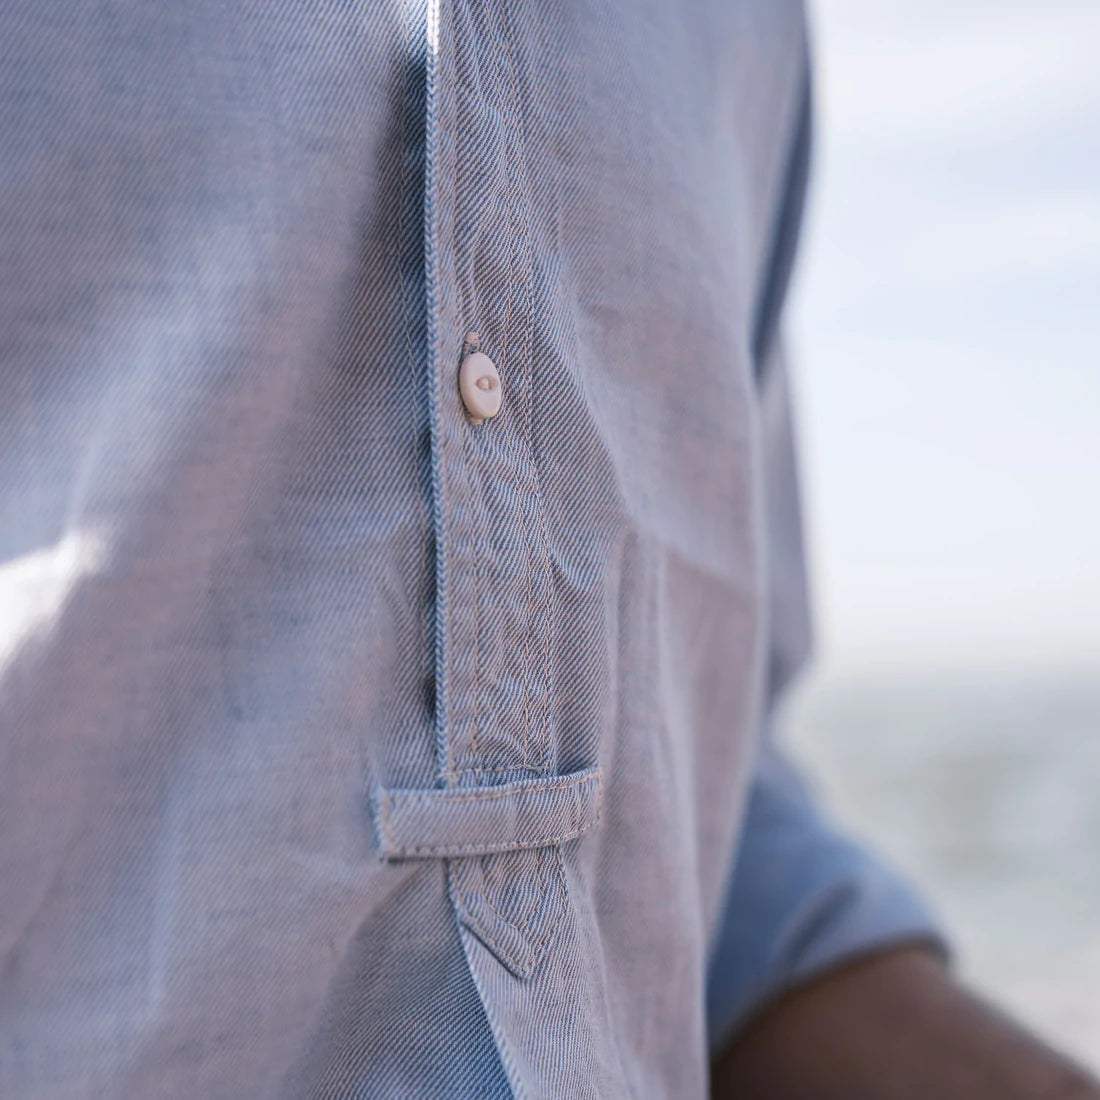 Yarmouth Oilskins - The Admiralty Shirt - Cotton - Light Blue